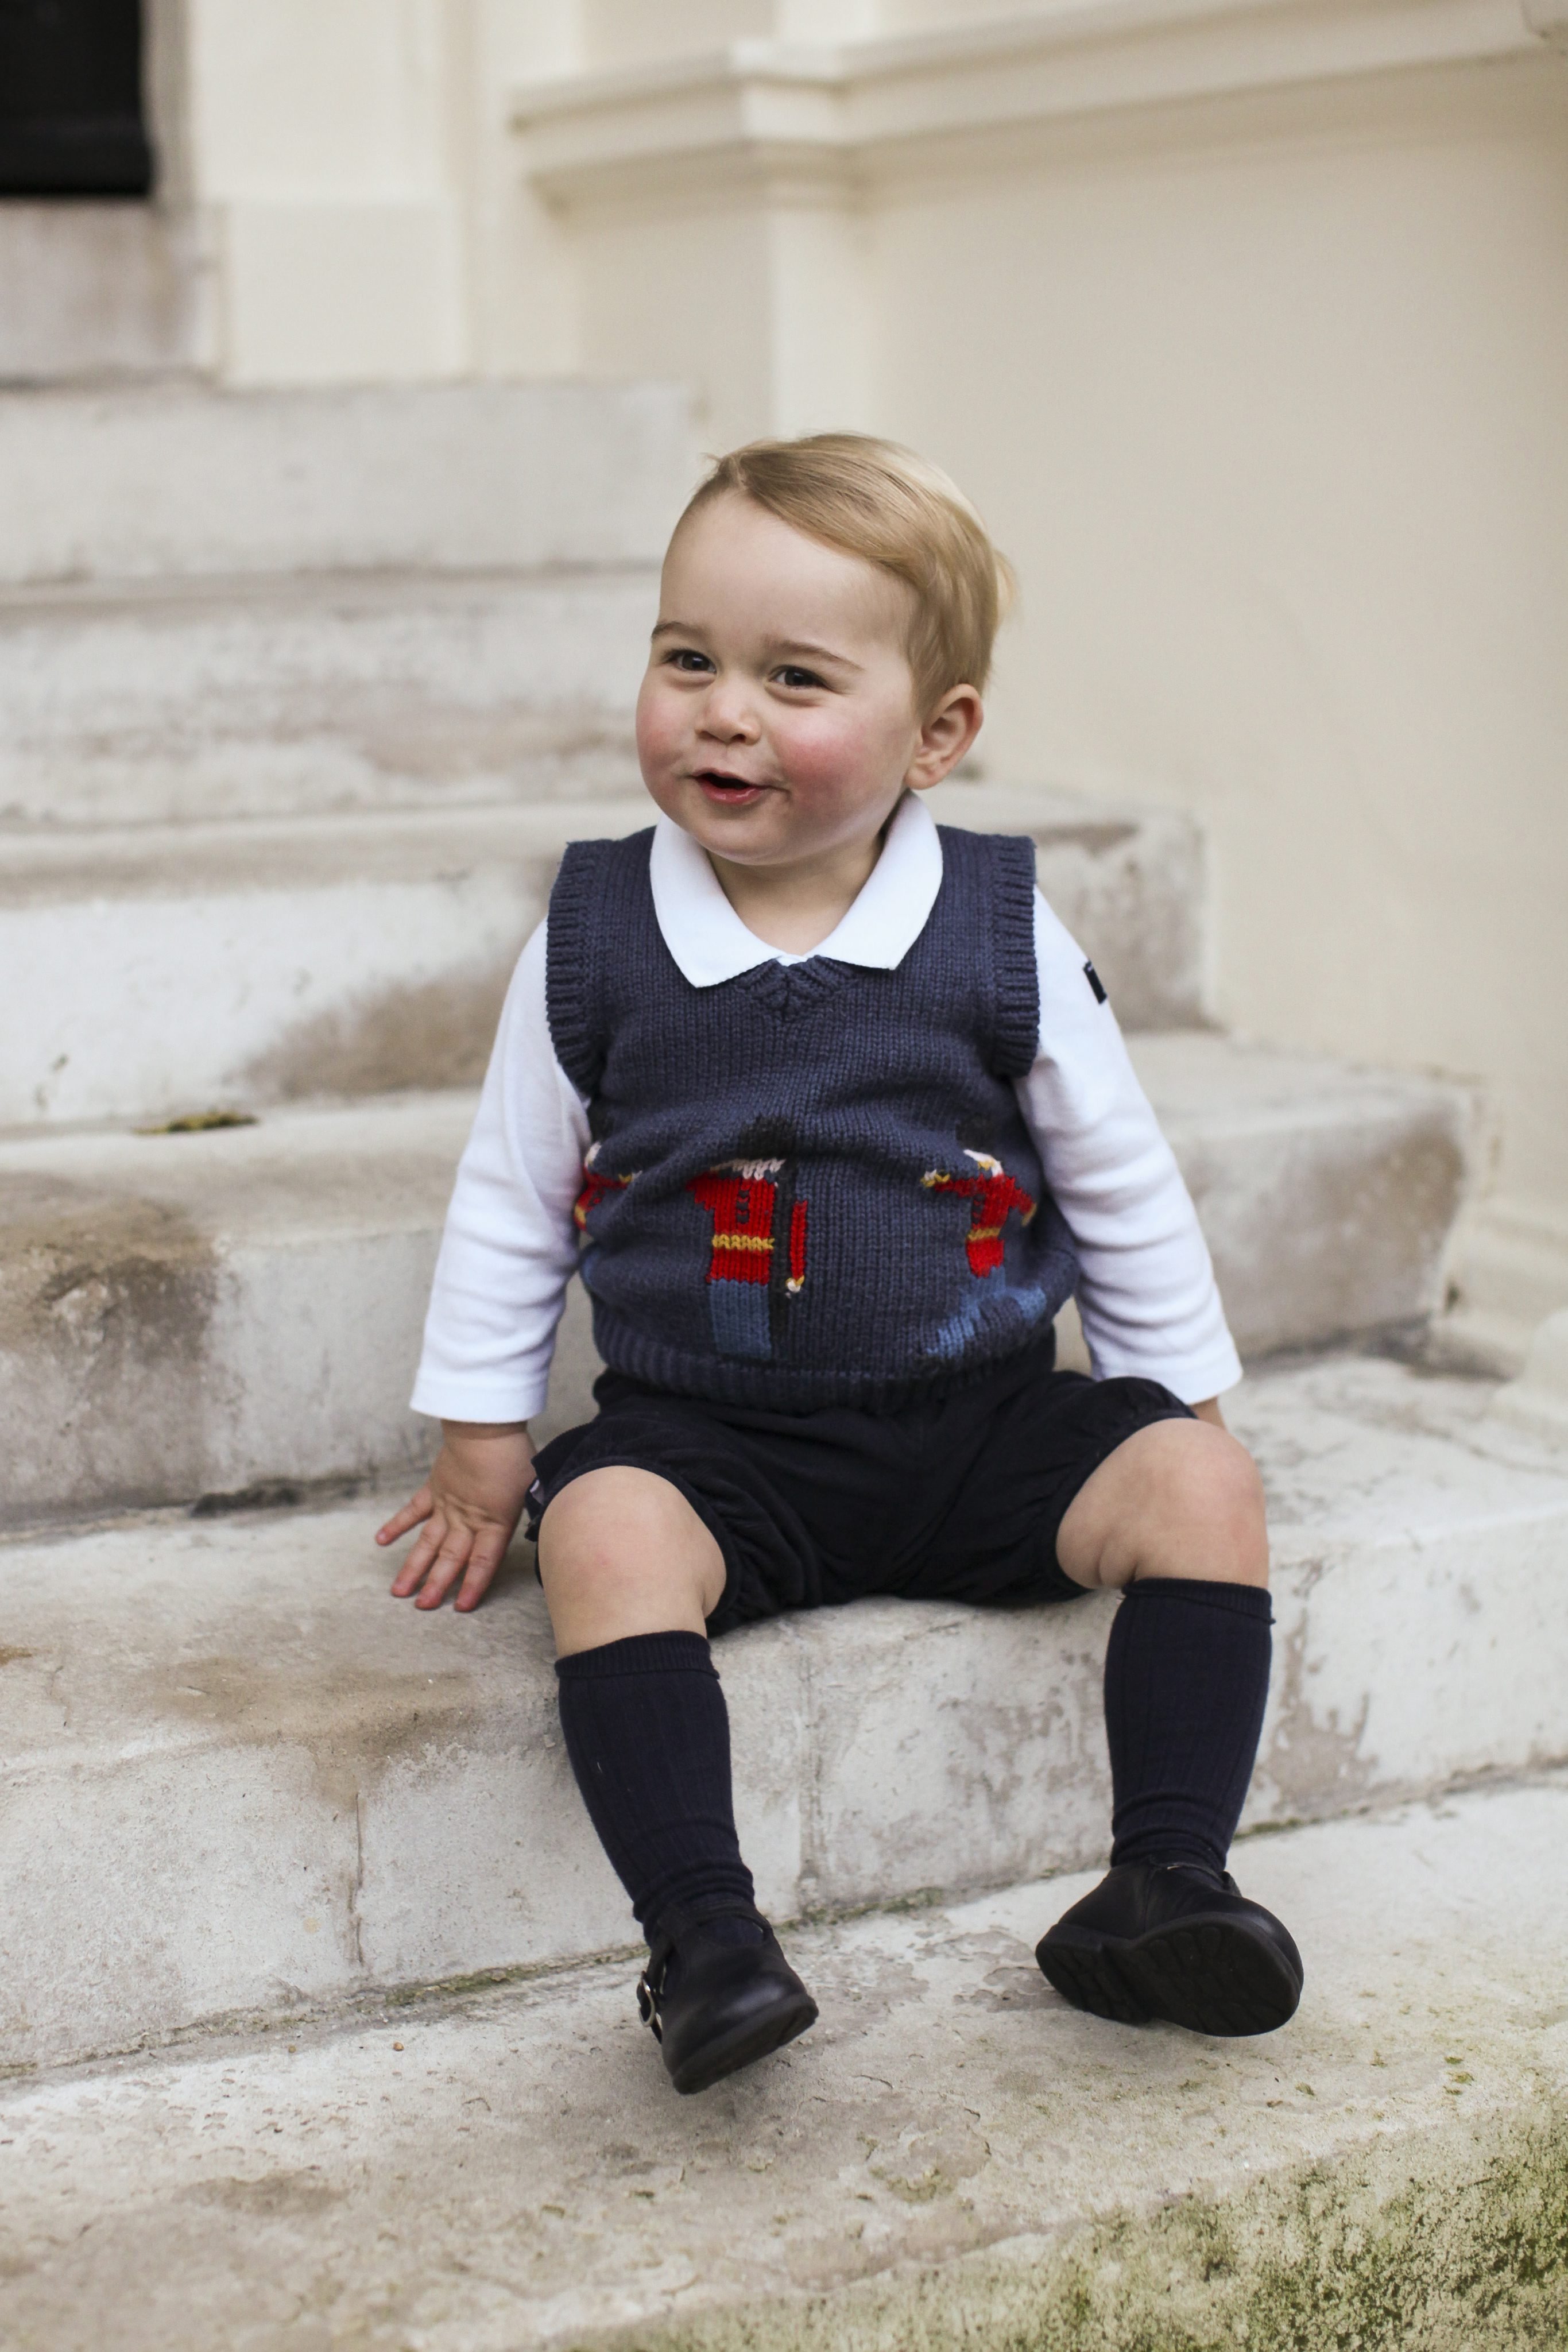 A Christmas photo of Prince George in a courtyard at Kensington Palace, London released on Dec. 13, 2014. (The Duke and Duchess of Cambridge/EPA)